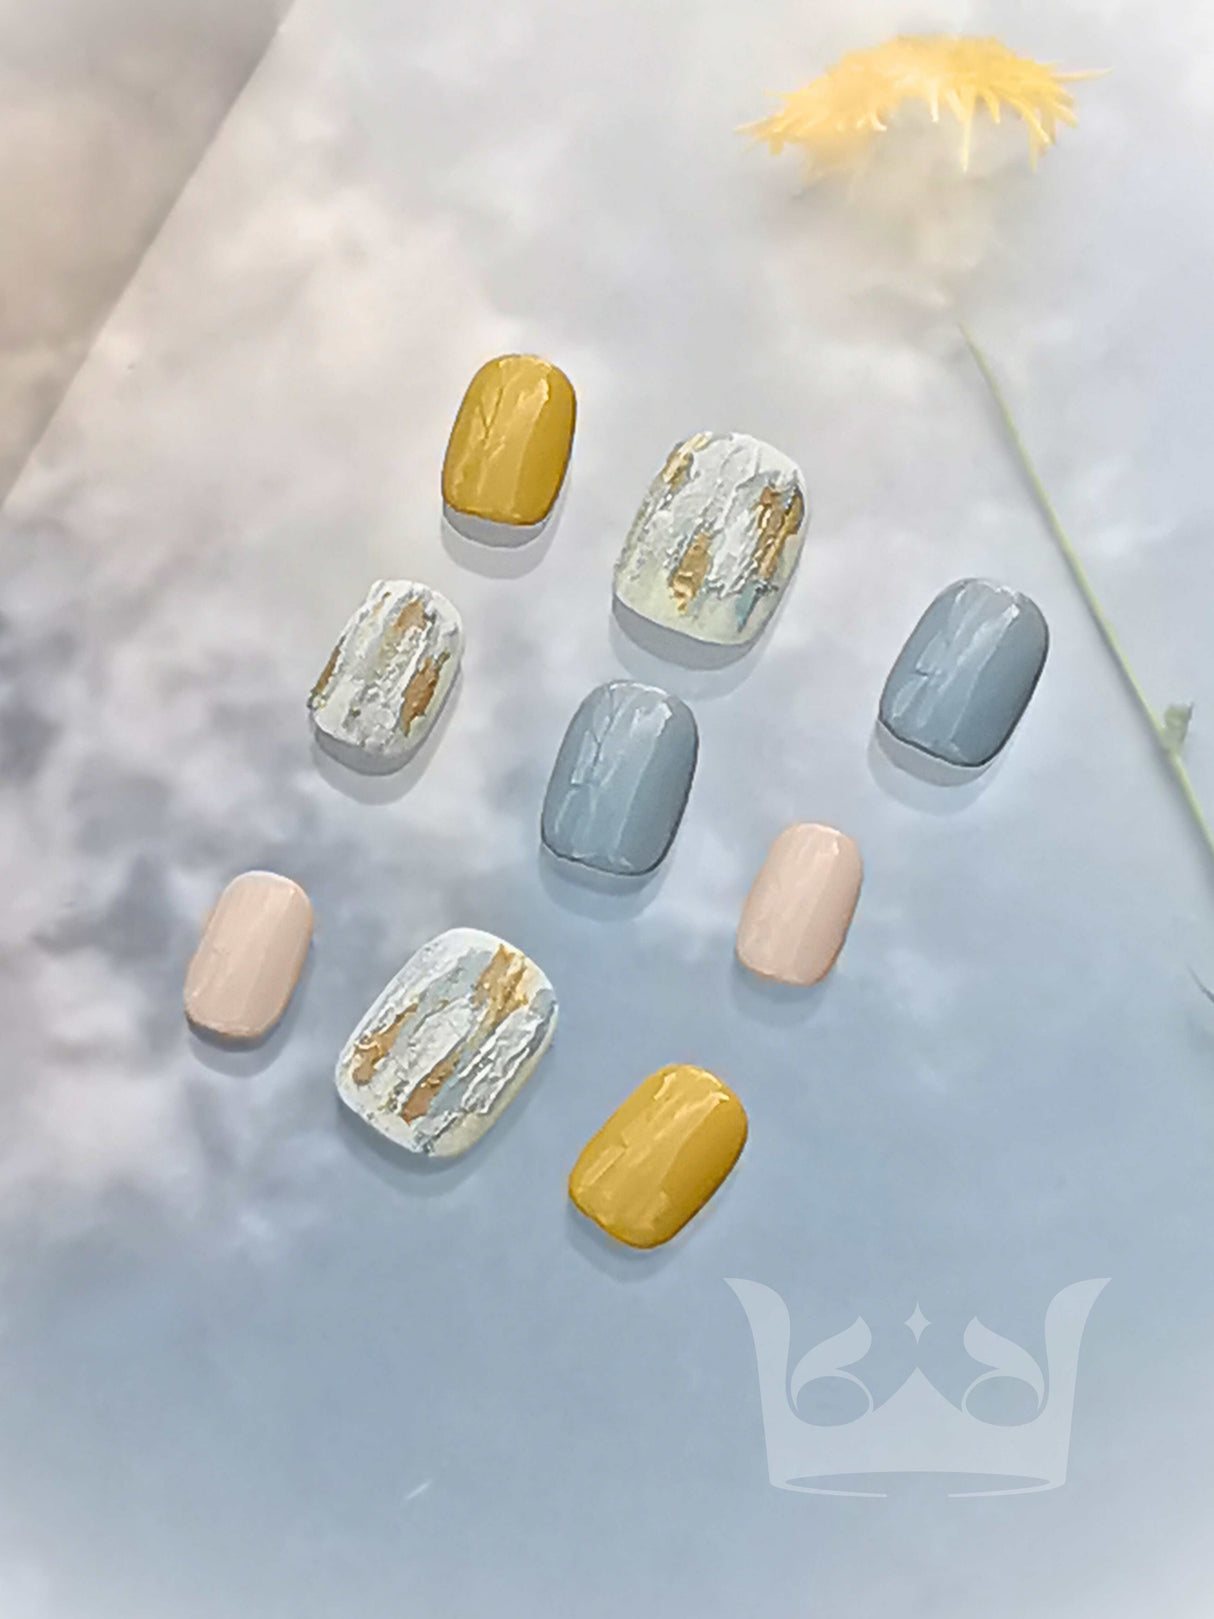 Stylish acrylic nails for personalization and self-expression with pastel colors, metallic accents, solid color finishes, and marbled effects. Perfect for any occasion.